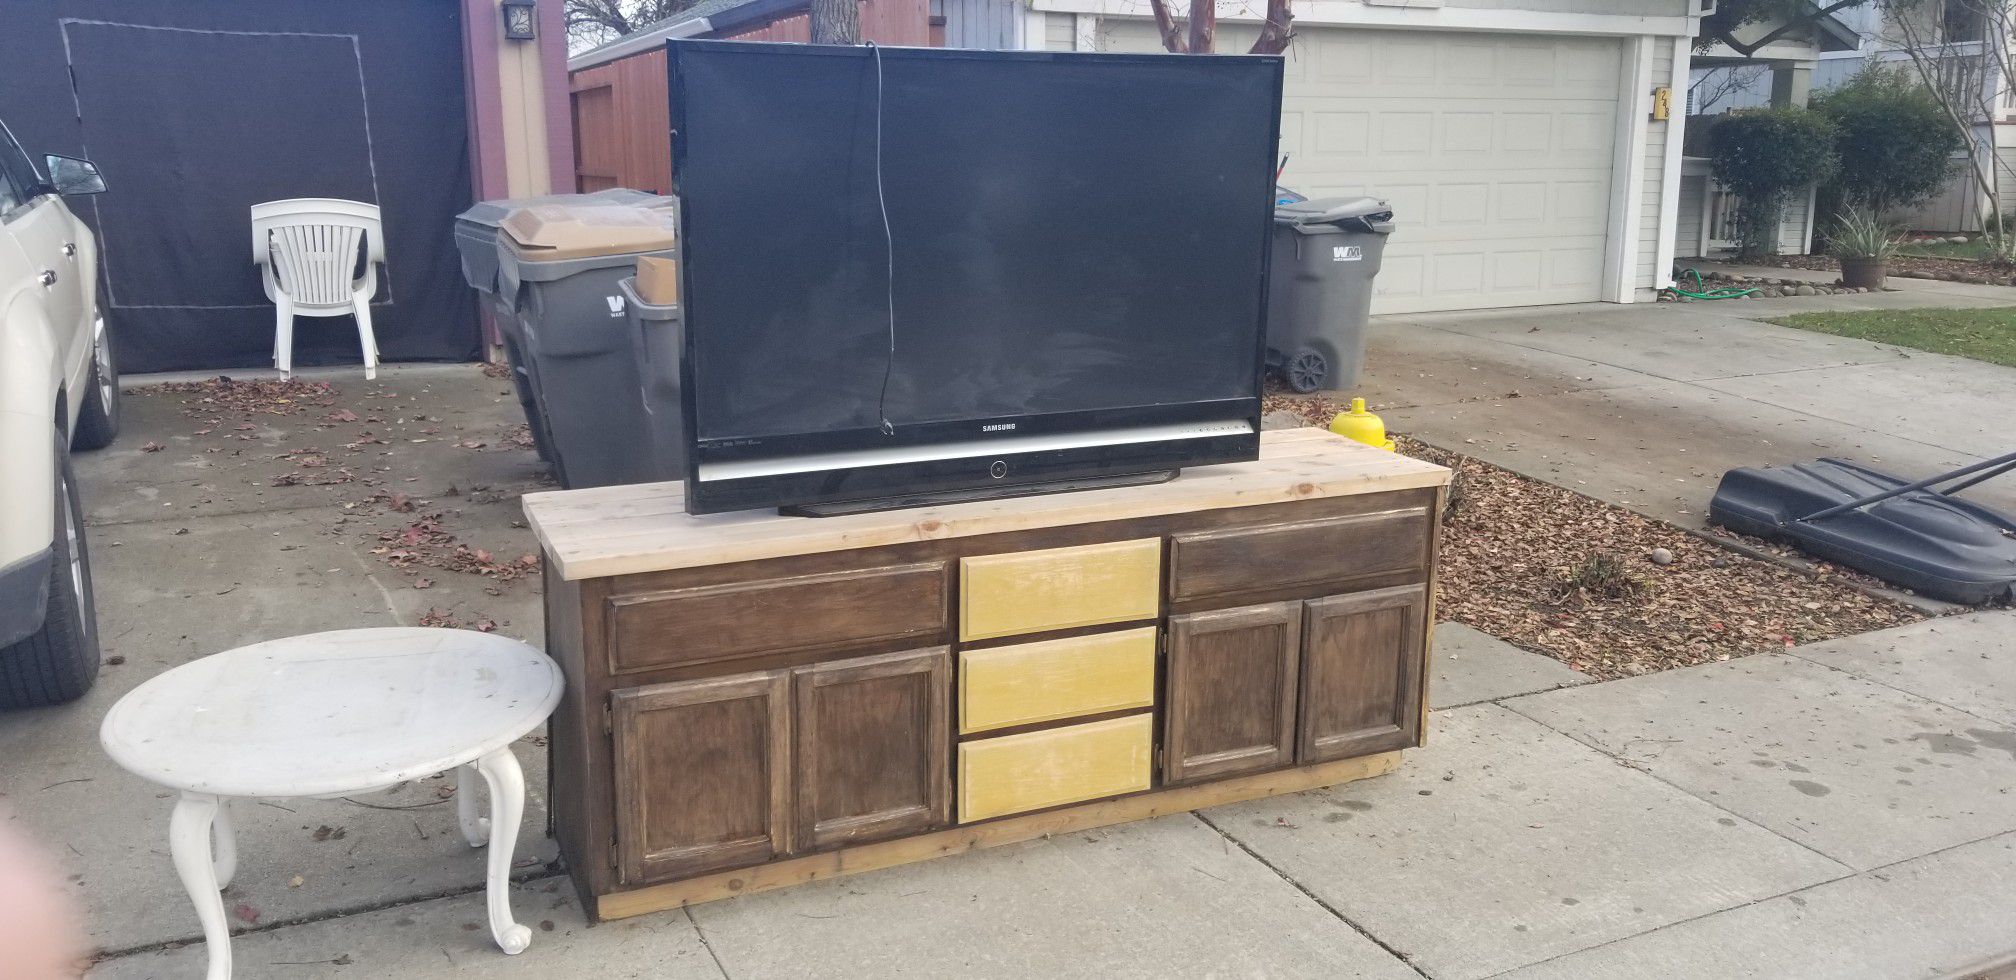 (FREE)Samsung projection tv/cabinet/small table